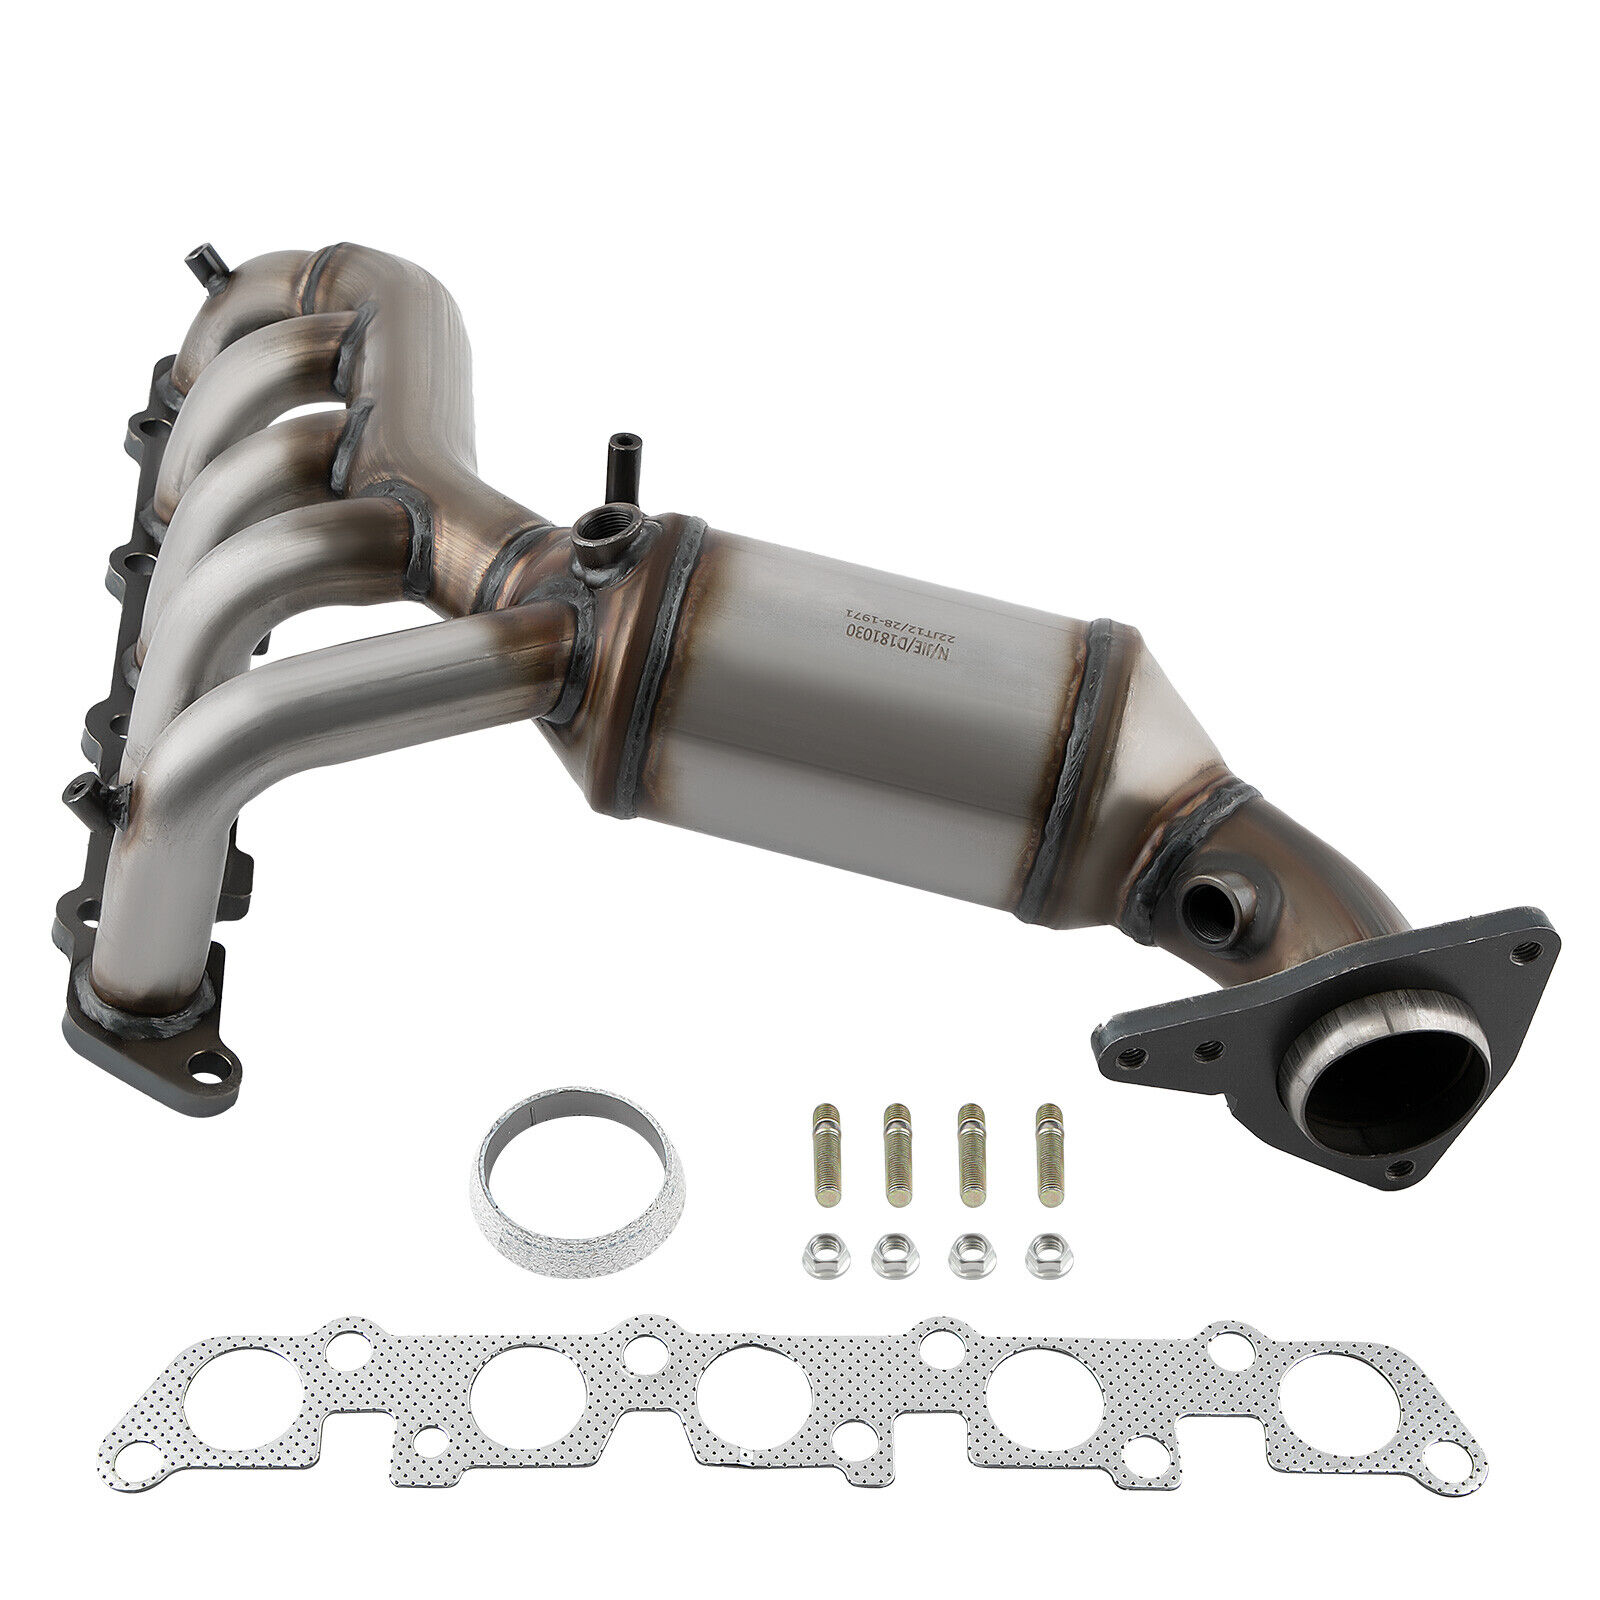 New Catalytic Converter Exhaust Manifold for Hummer H3 3.7L 2007-2008 W/ Gasket